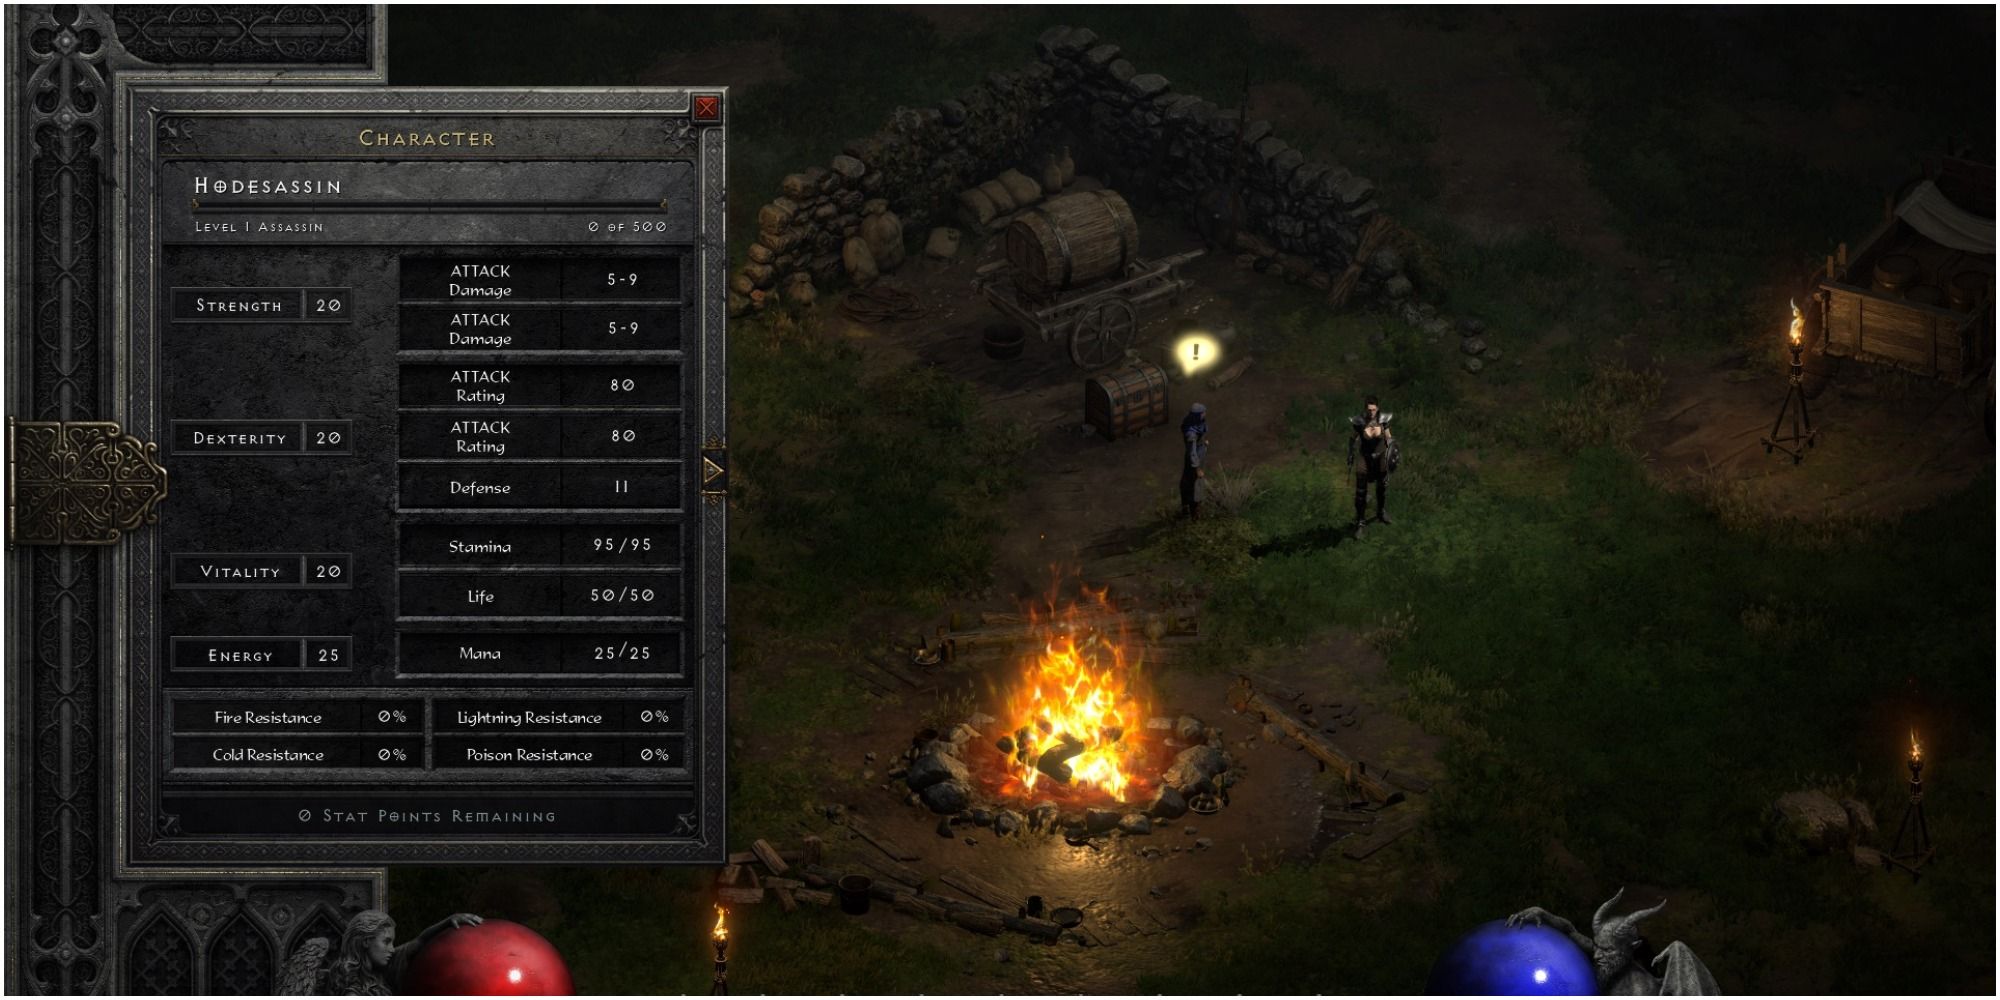 Diablo 2 Resurrected Character Sheet For A Level One Assassin